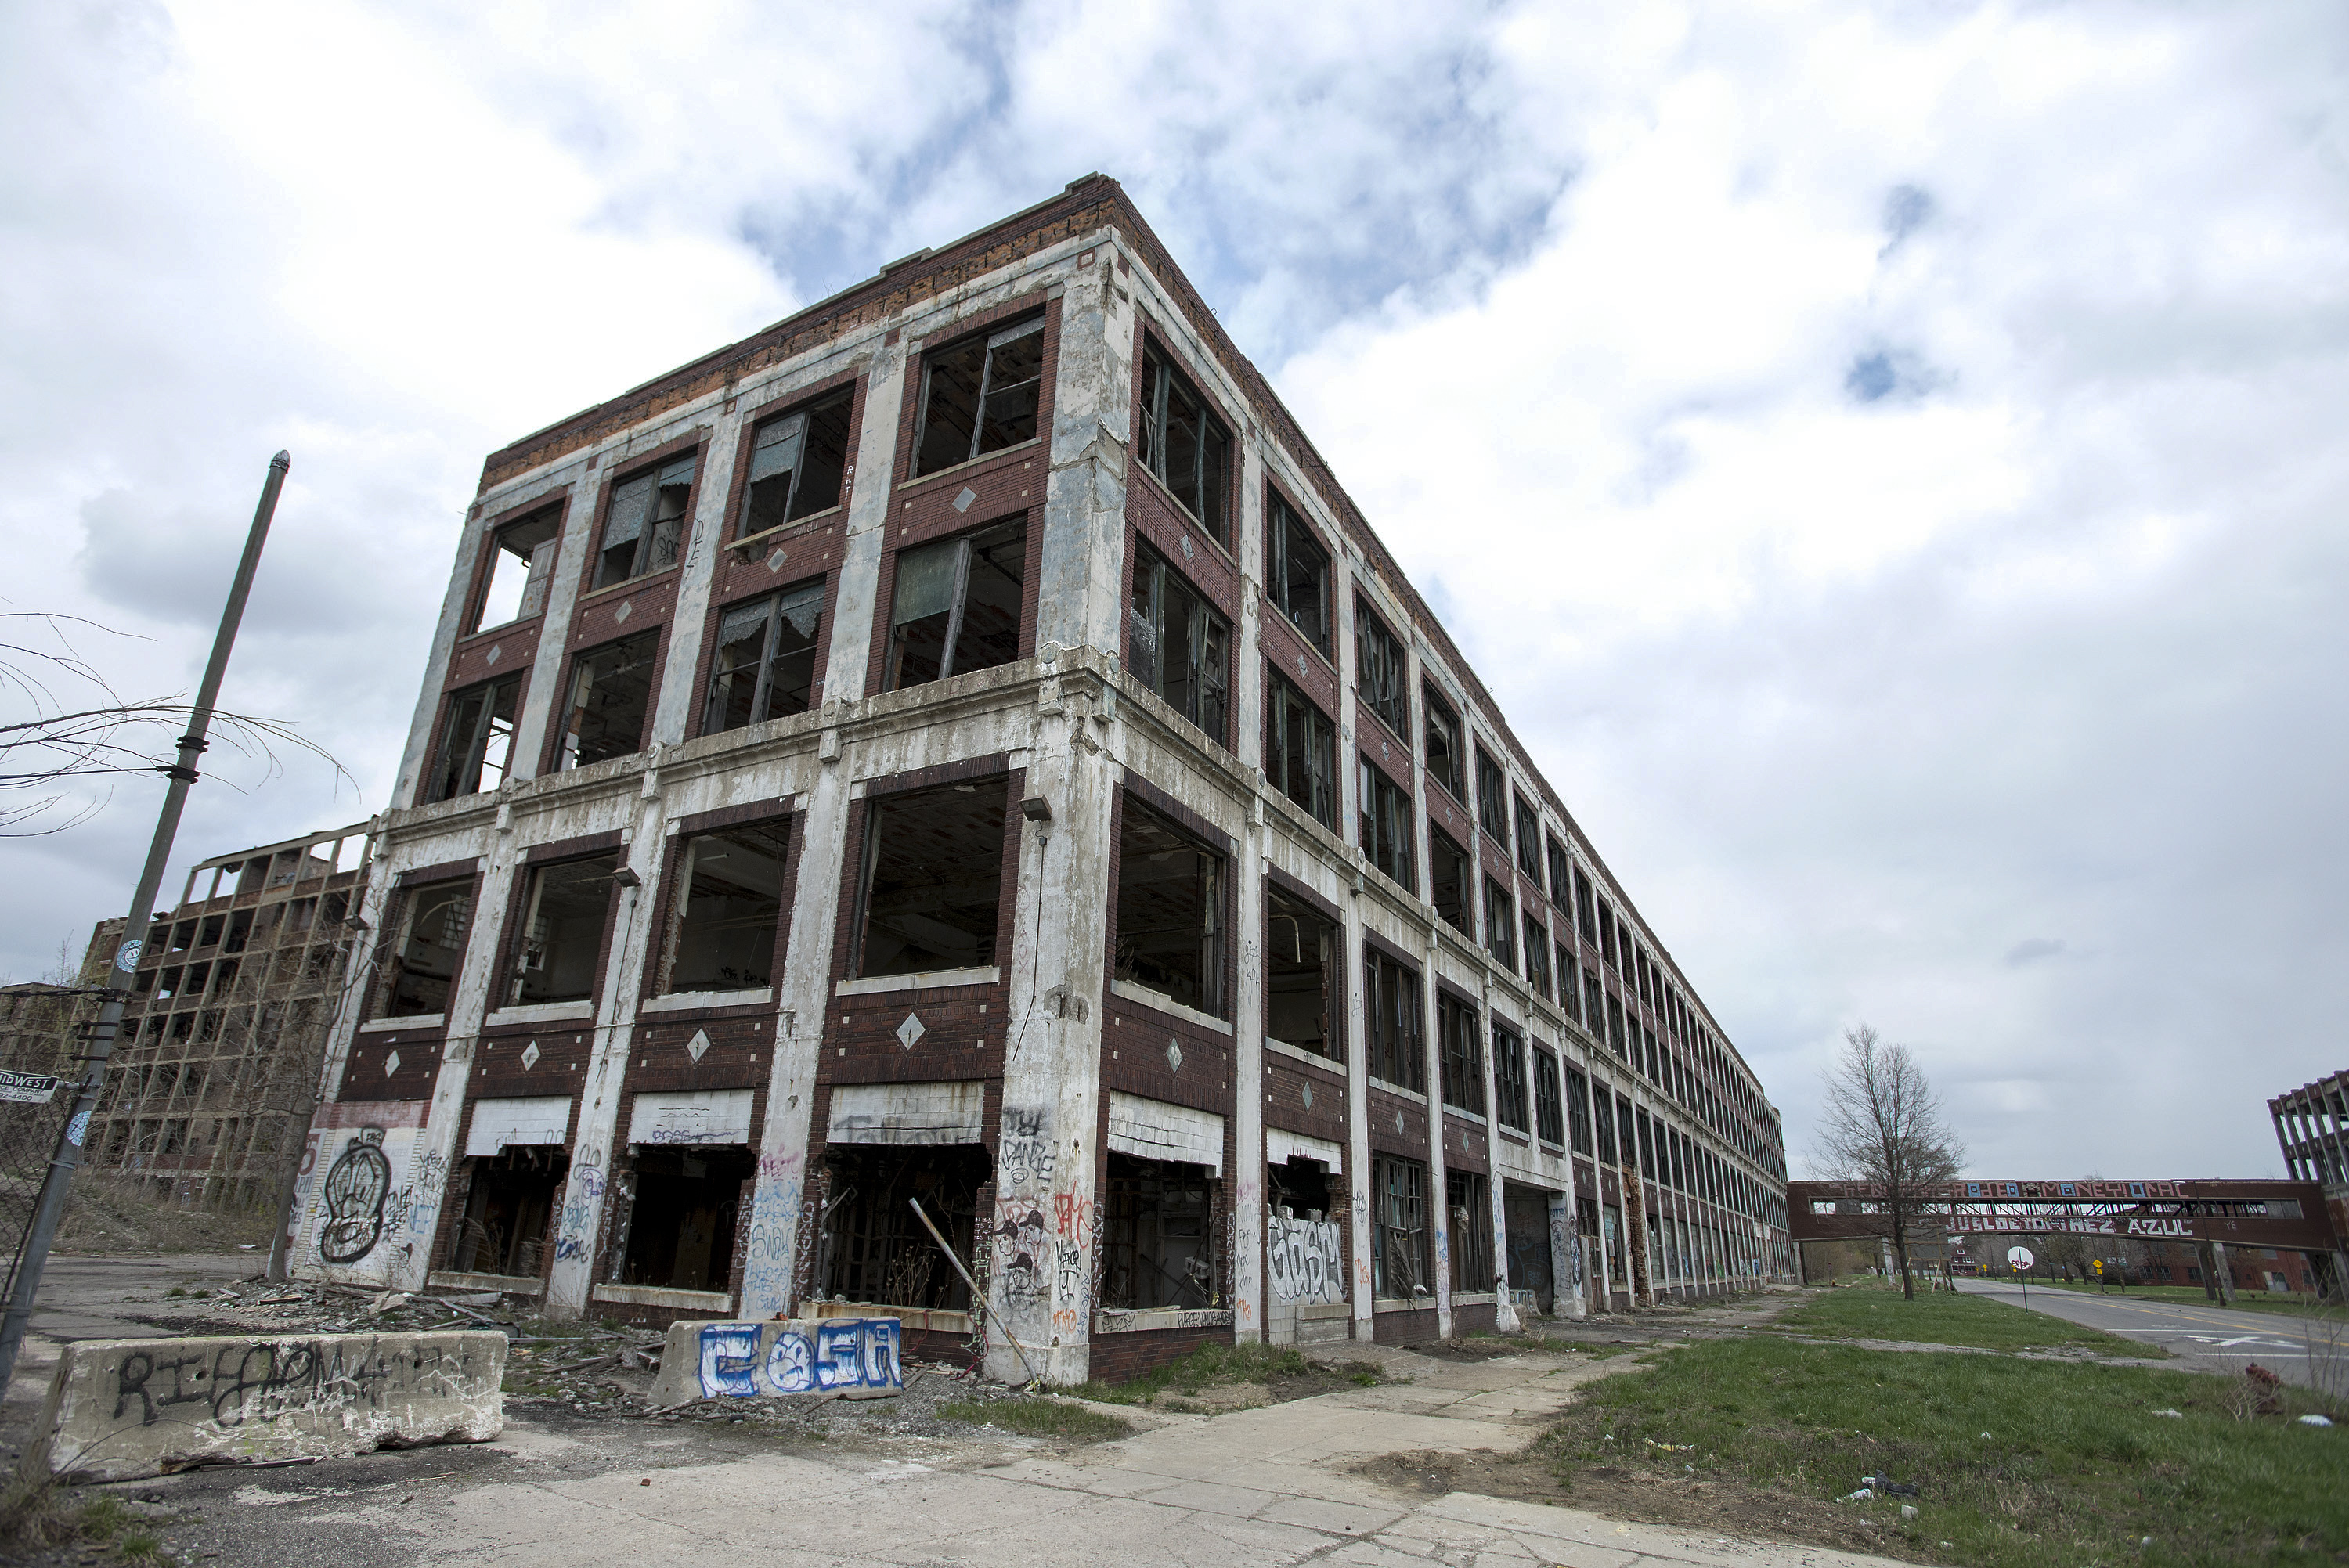 The old administration building of the abandoned Packard Automotive Plant, a former automobile-manufacturing factory in Detroit, seen Tuesday, April 21, 2015 in Detroit, Michigan.
